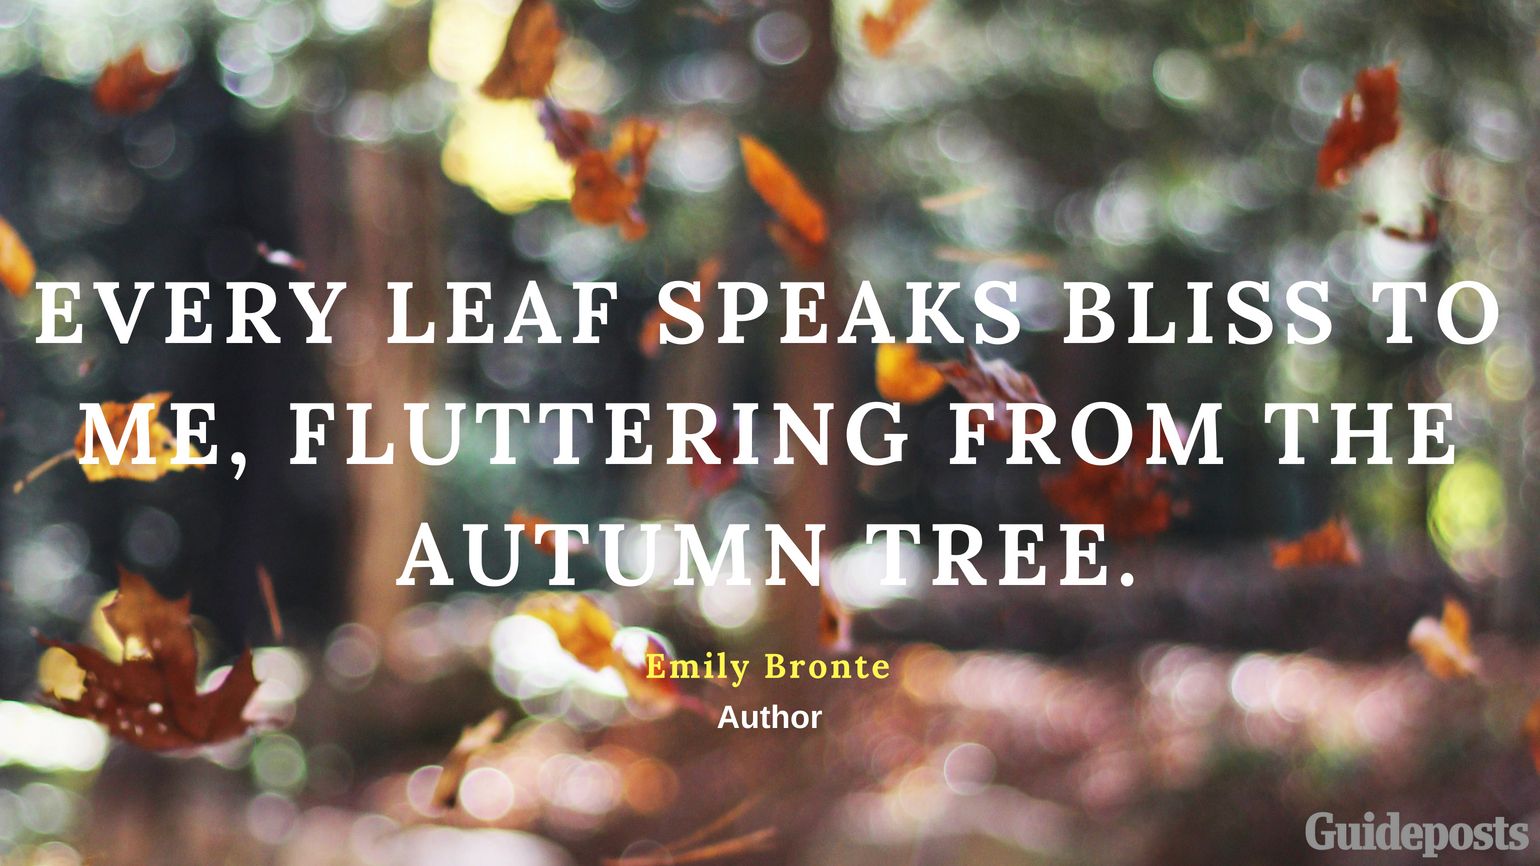 Every leaf speaks bliss to me, fluttering from the autumn tree. —Emily Bronte